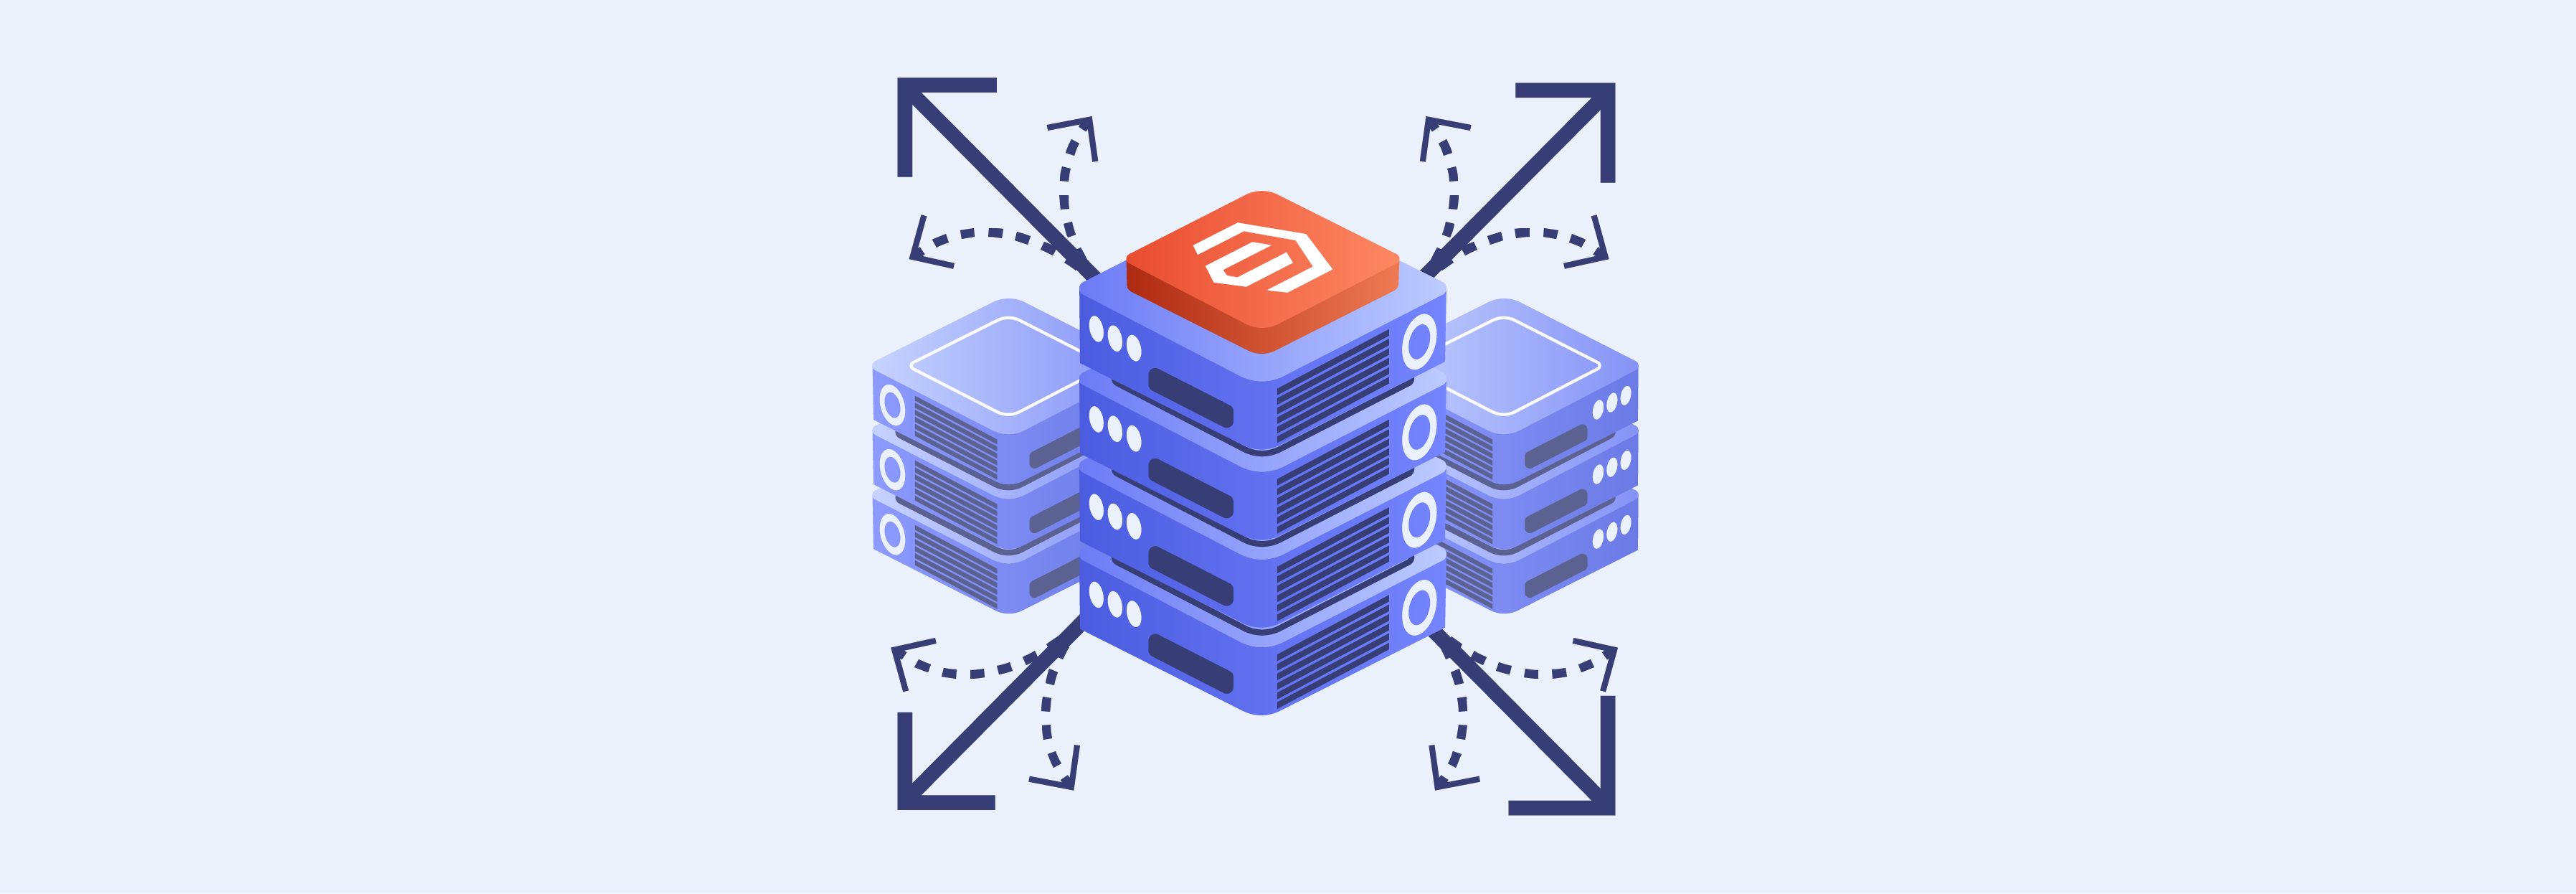 Scalable and flexible Magento hosting solutions for growing businesses